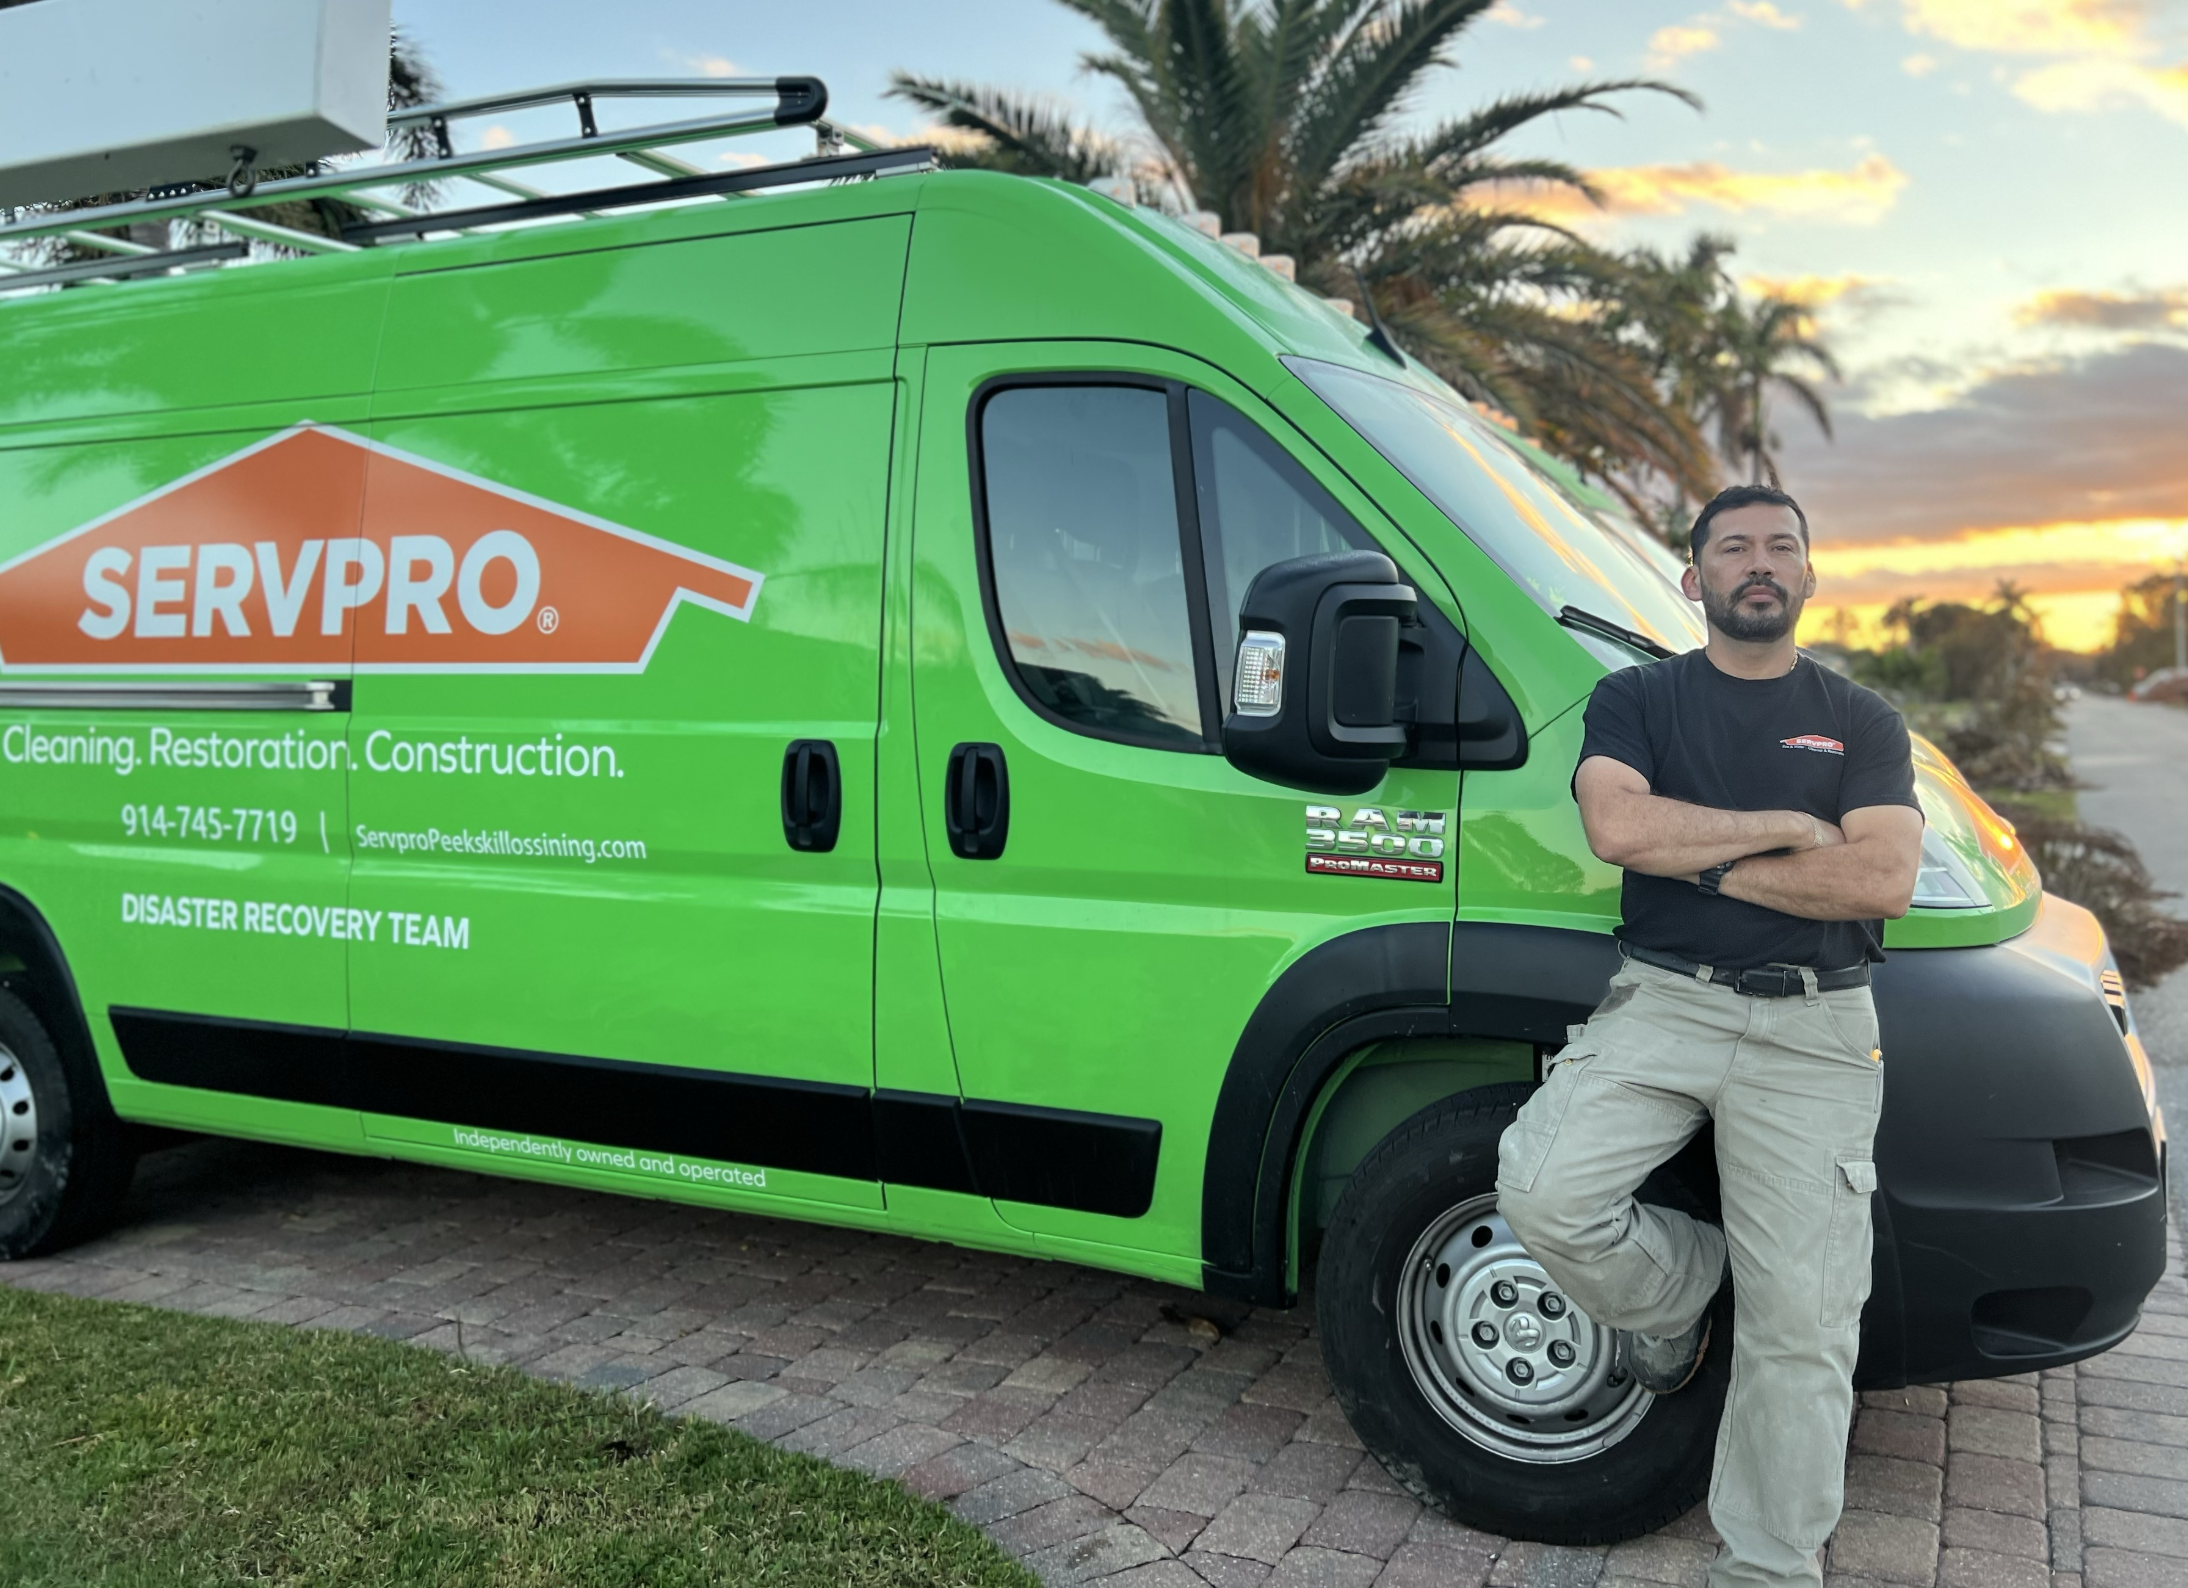 SERVPRO in the Sun